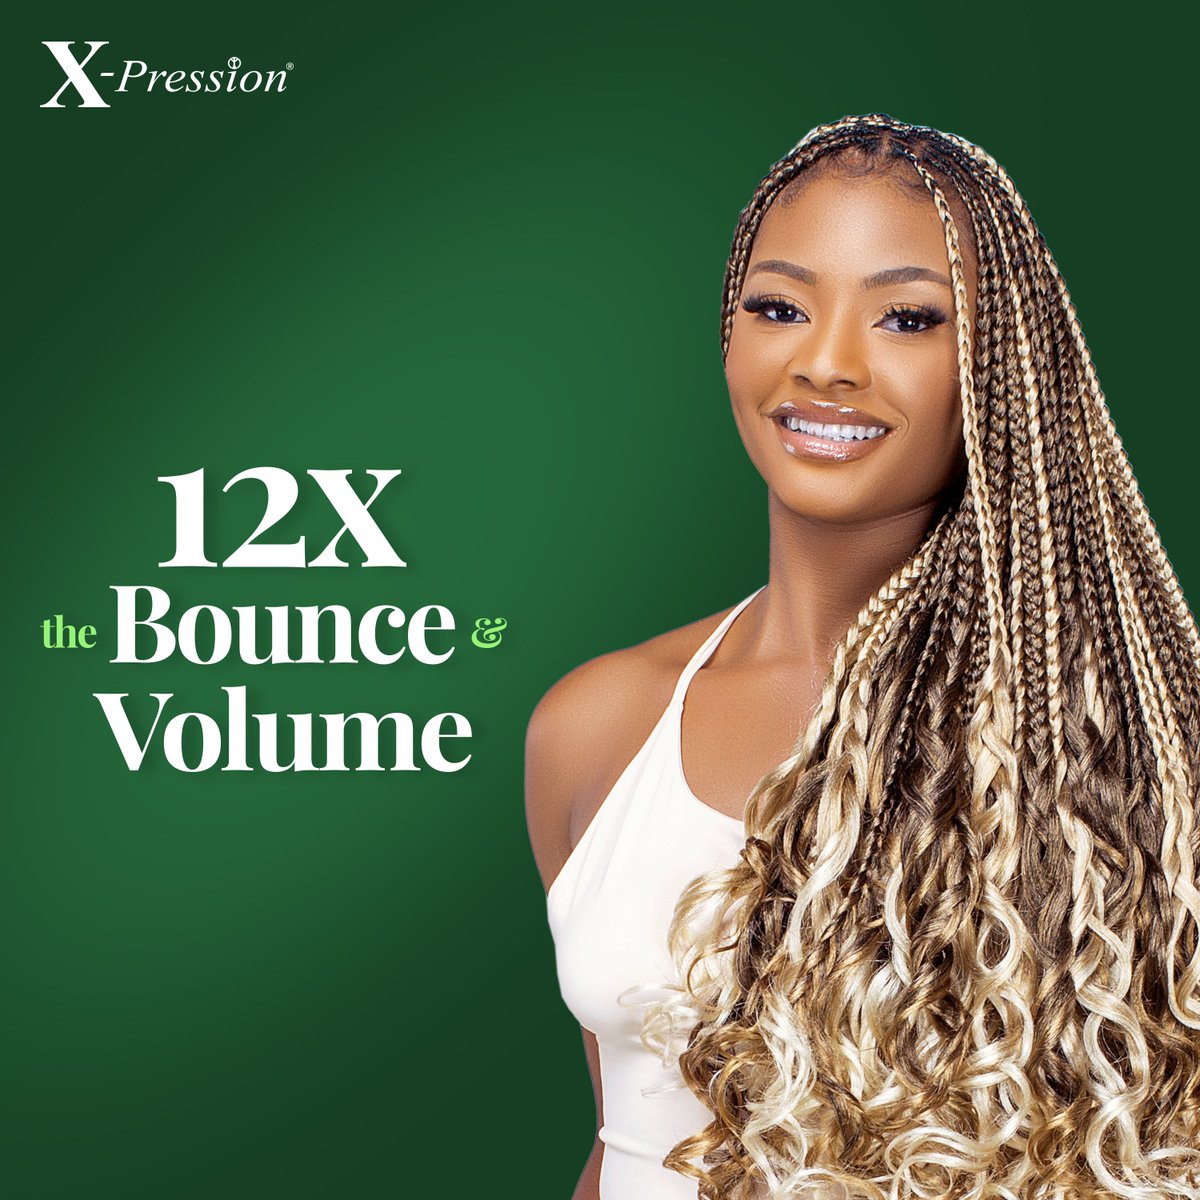 Seize the day and make it count. Elevate your hair game with '12X Curly Body'! 

Achieve stunning braids with 12 times the Volume and Bounce. Say hello to your new go-to for gorgeous curls!

#xpression #monday #12XCurlyBody #curl #curlyhair